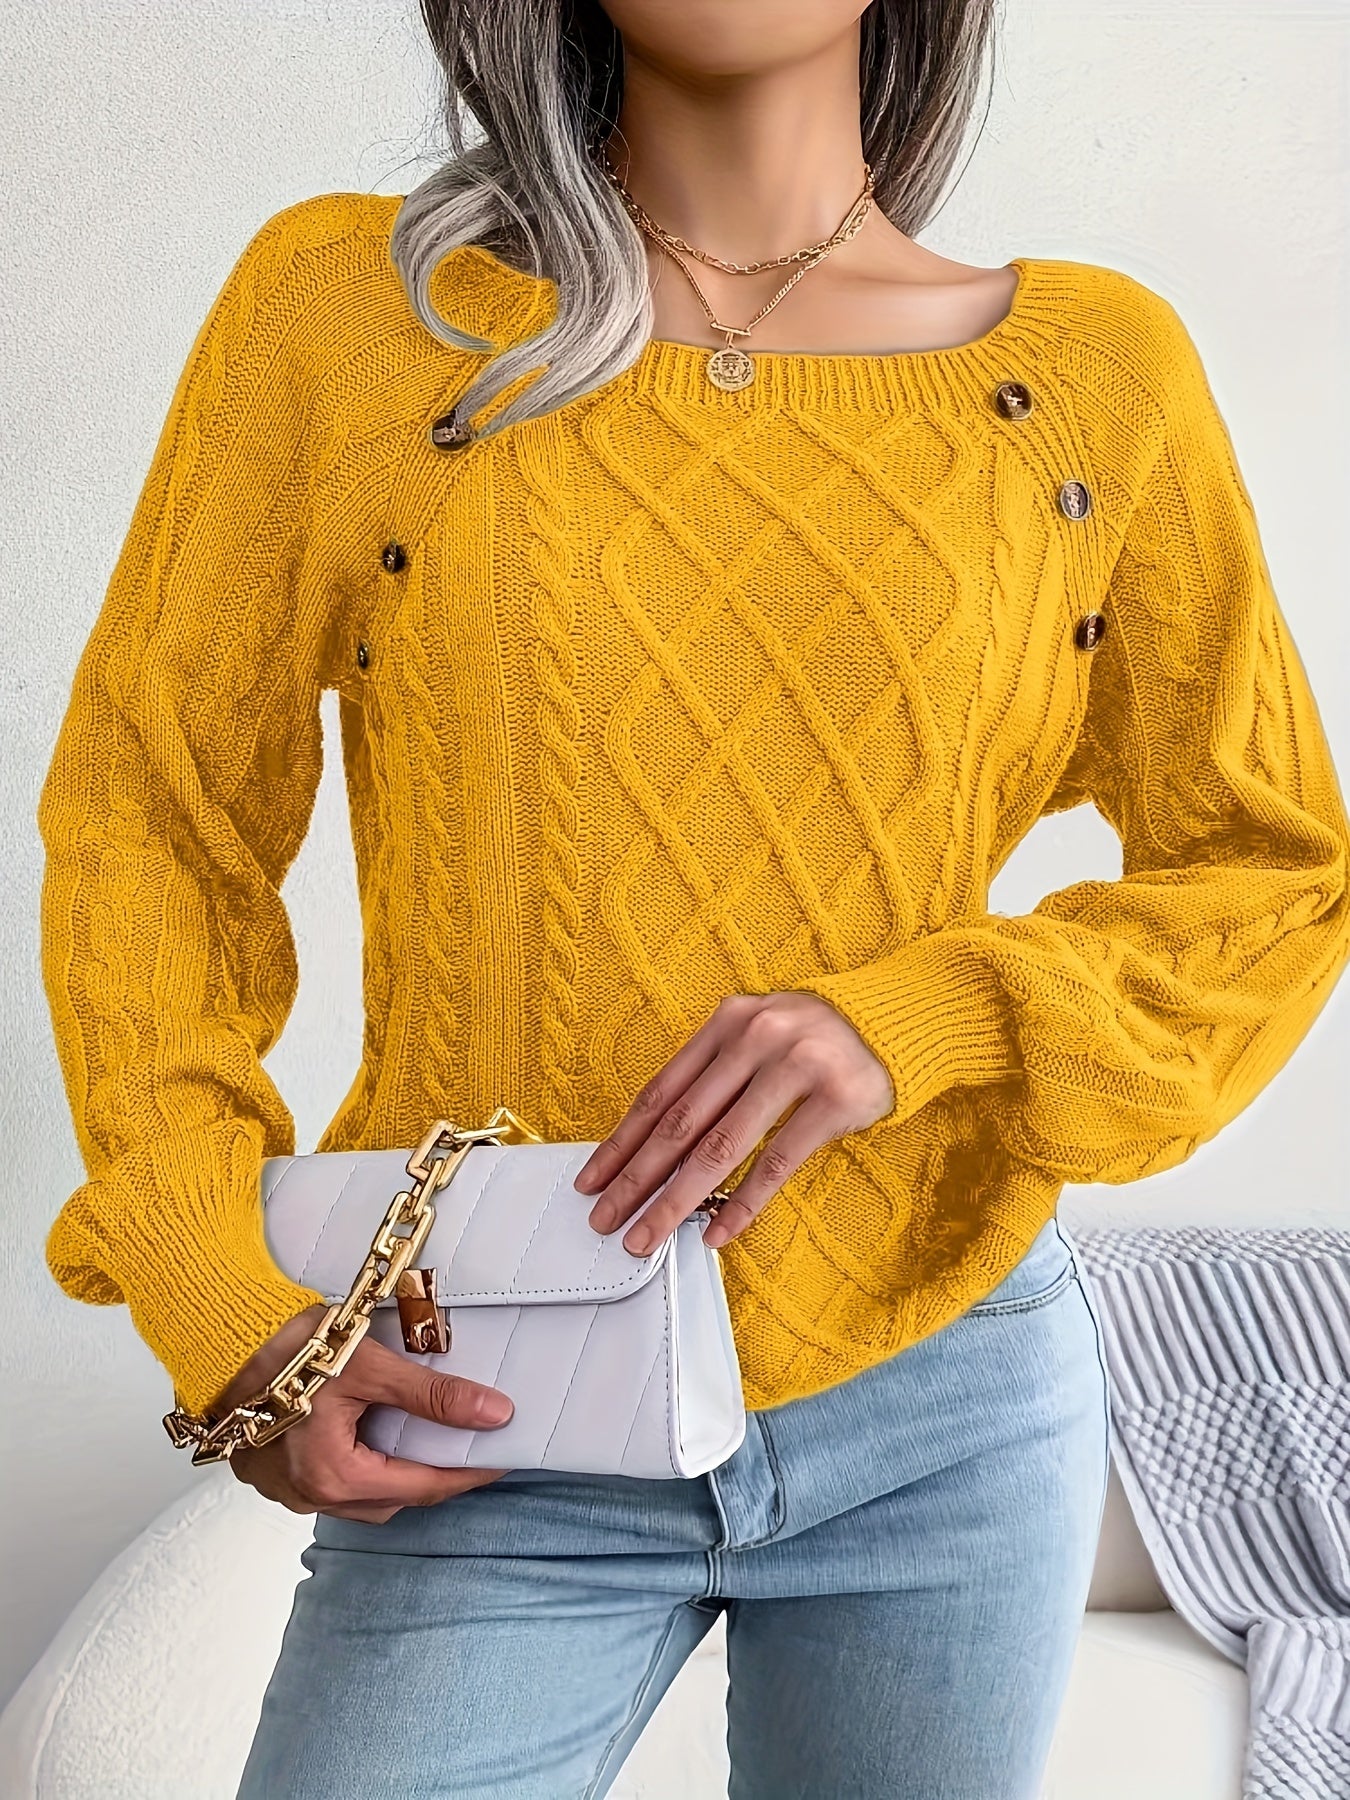 Cozy Cable Knit Sweater